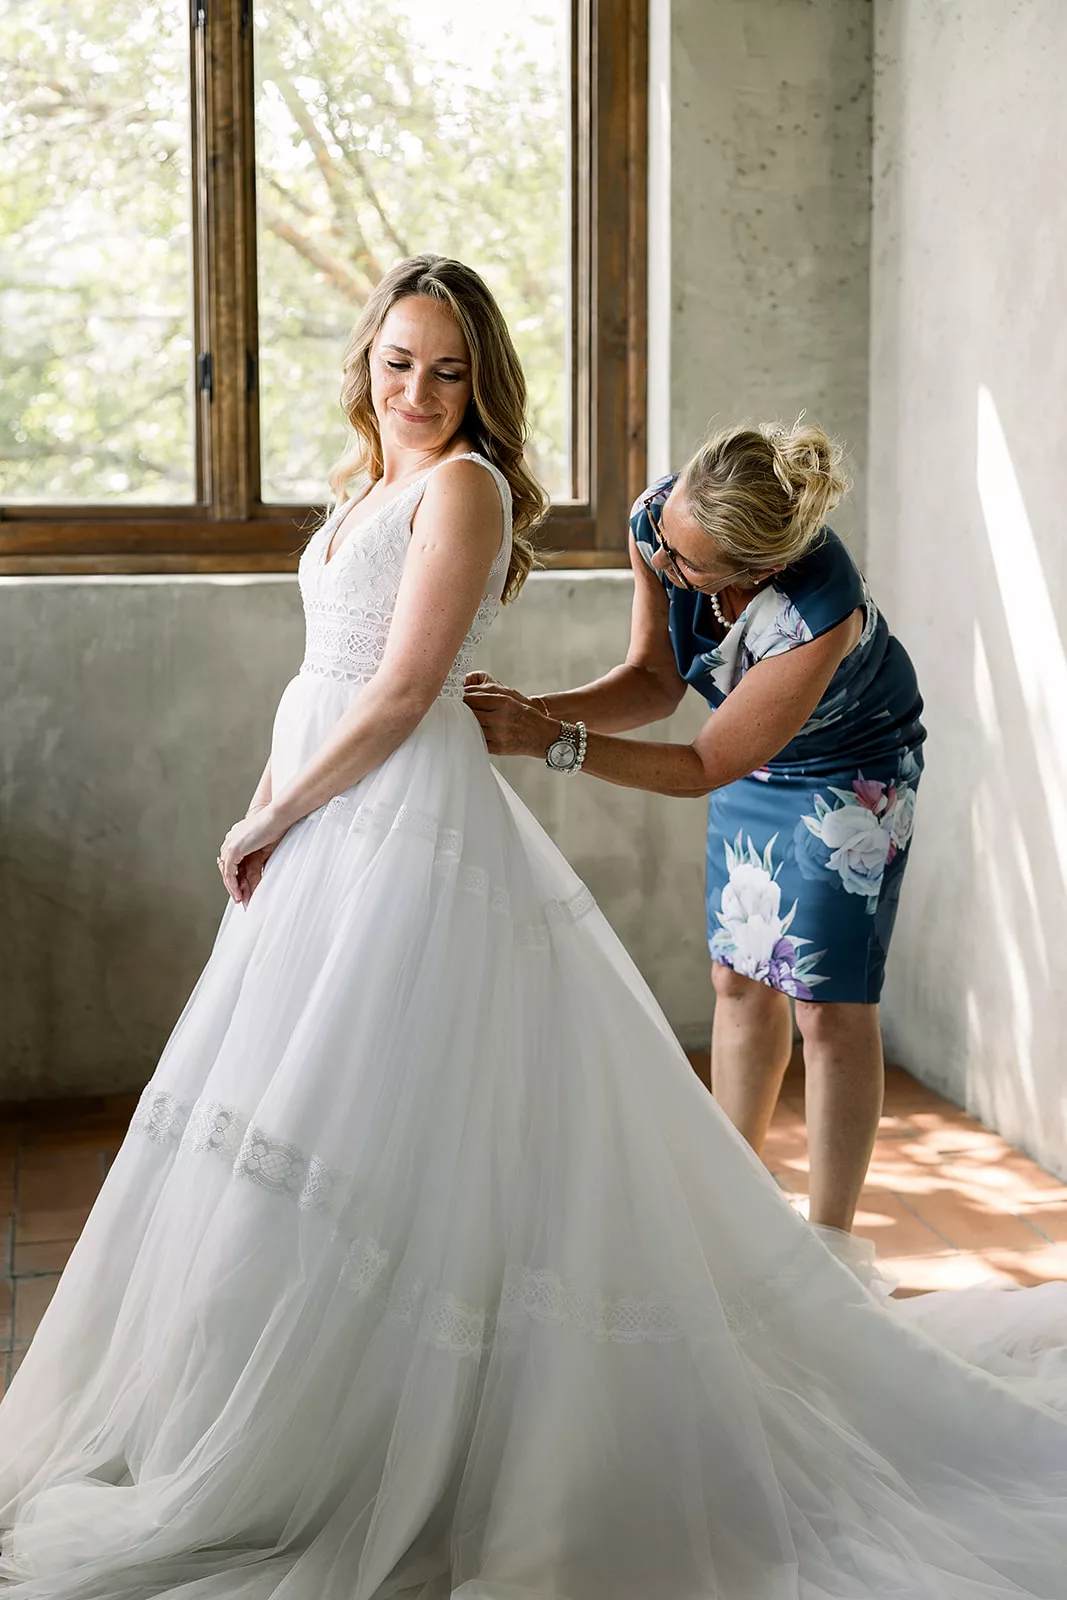 A bride is buttoned into her dress by her mother